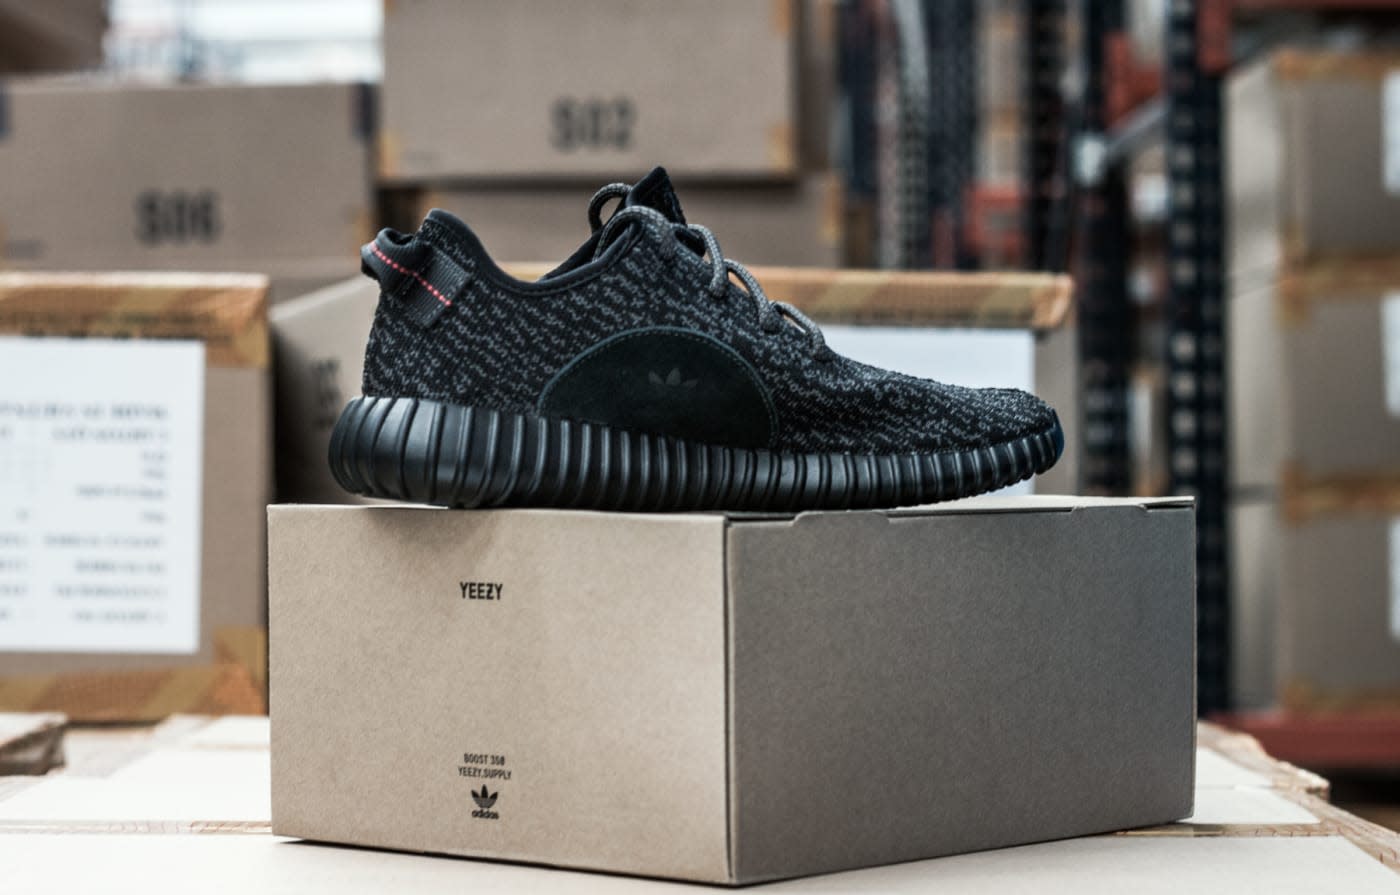 Adidas tries to make buying Yeezys fair but misses the mark Engadget